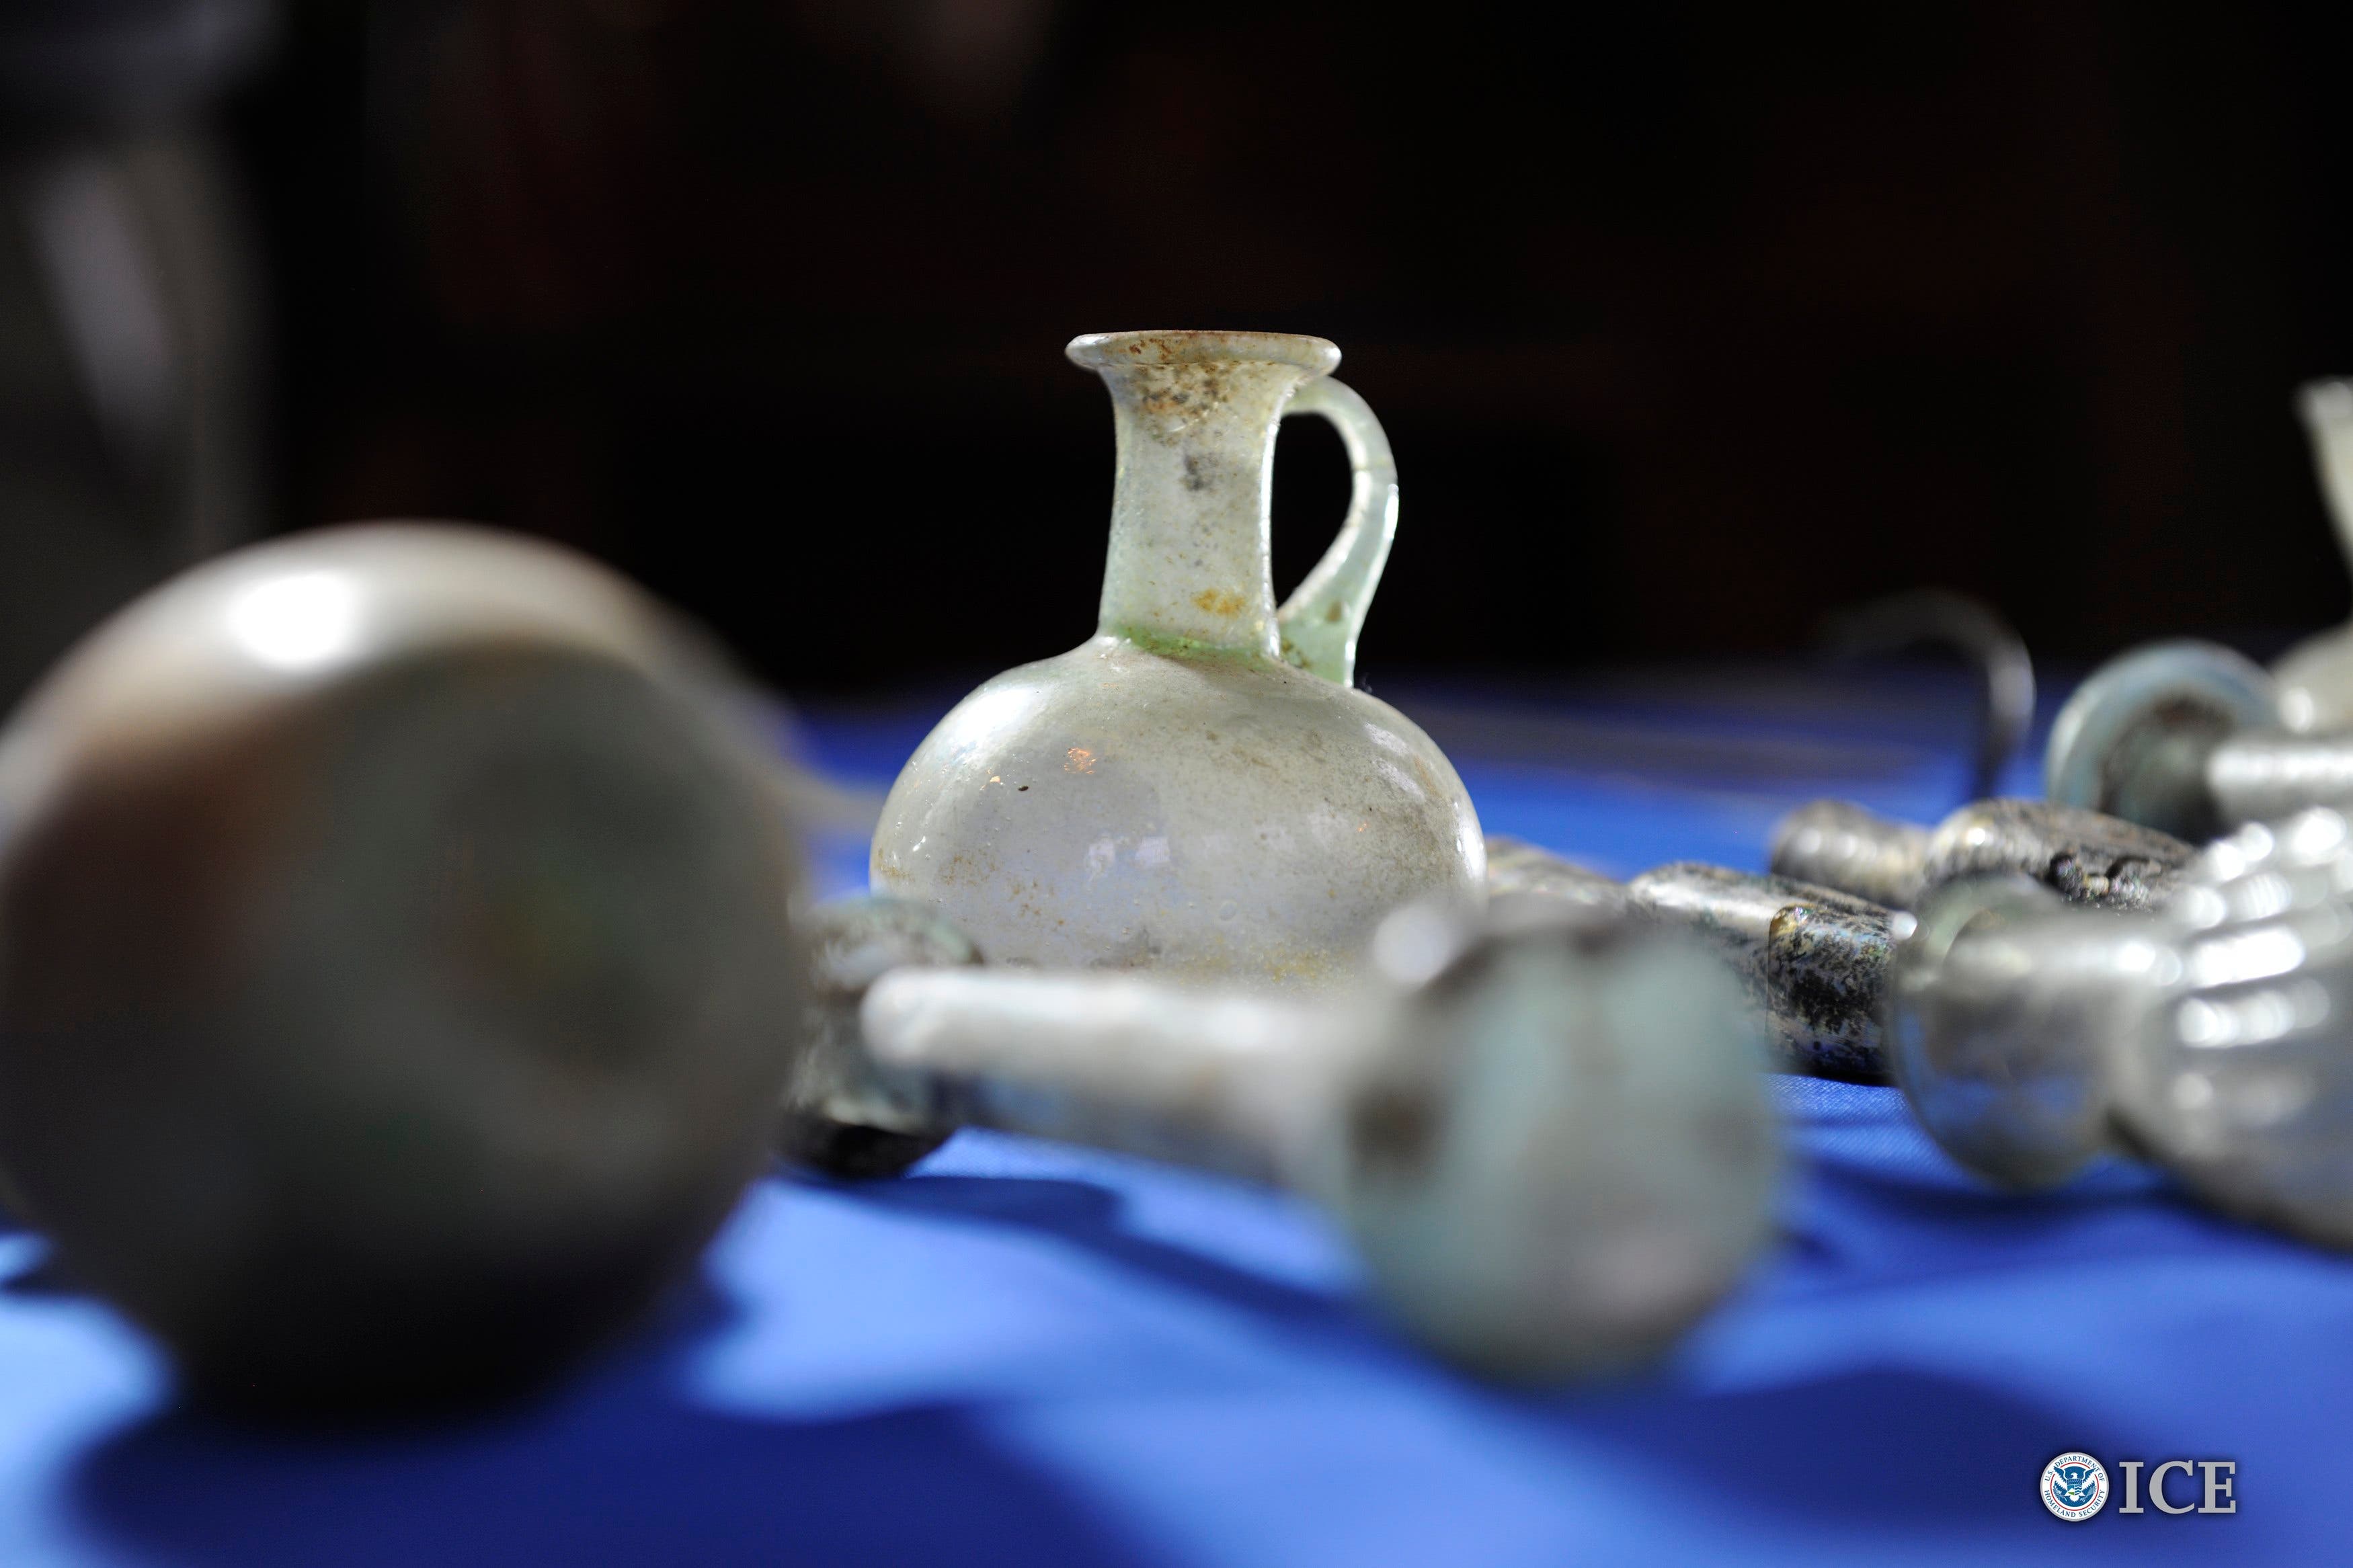 Some of the artifacts from more than 60 Iraqi cultural treasures illegally smuggled into the United States that were returned to Iraq. (Reuters).